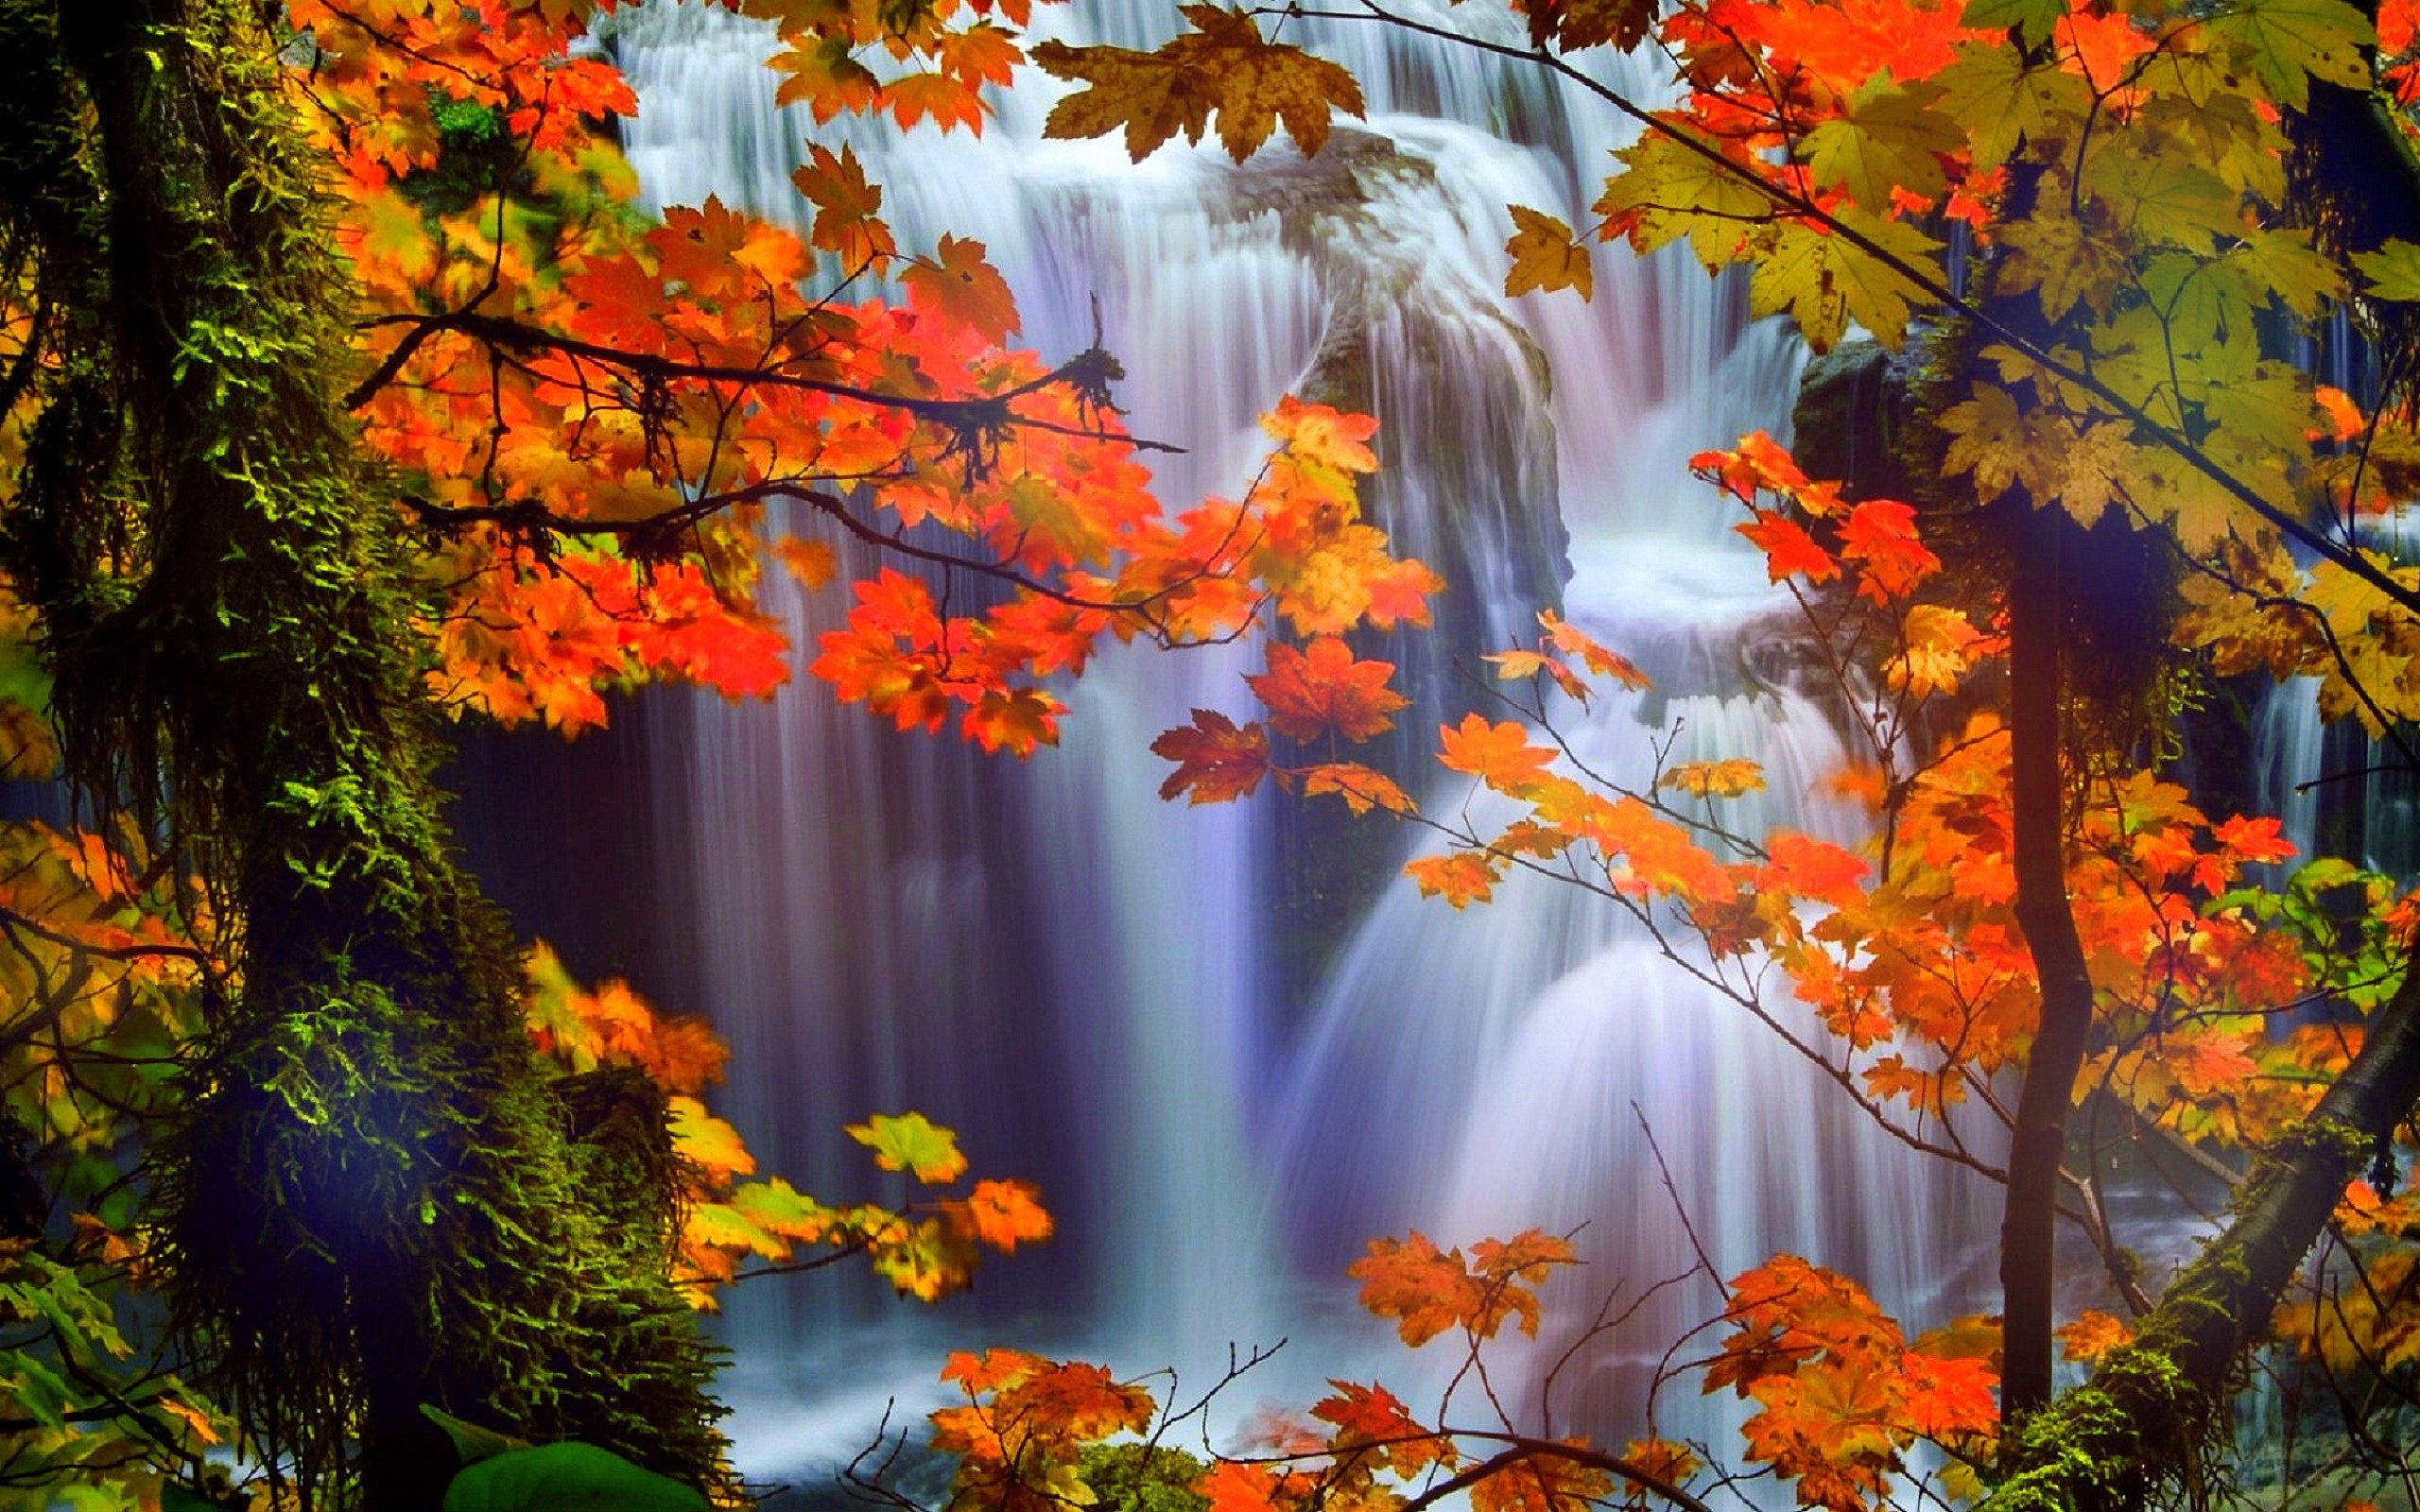 attractions, In, Dreams, Trees, Nature, Fall, Leaves, Beautiful, Waterfalls, Scenery, Love, Four, Seasons, Creative, Pre made, Colors, Stunning, Falls, Landscapes, Autumn Wallpaper